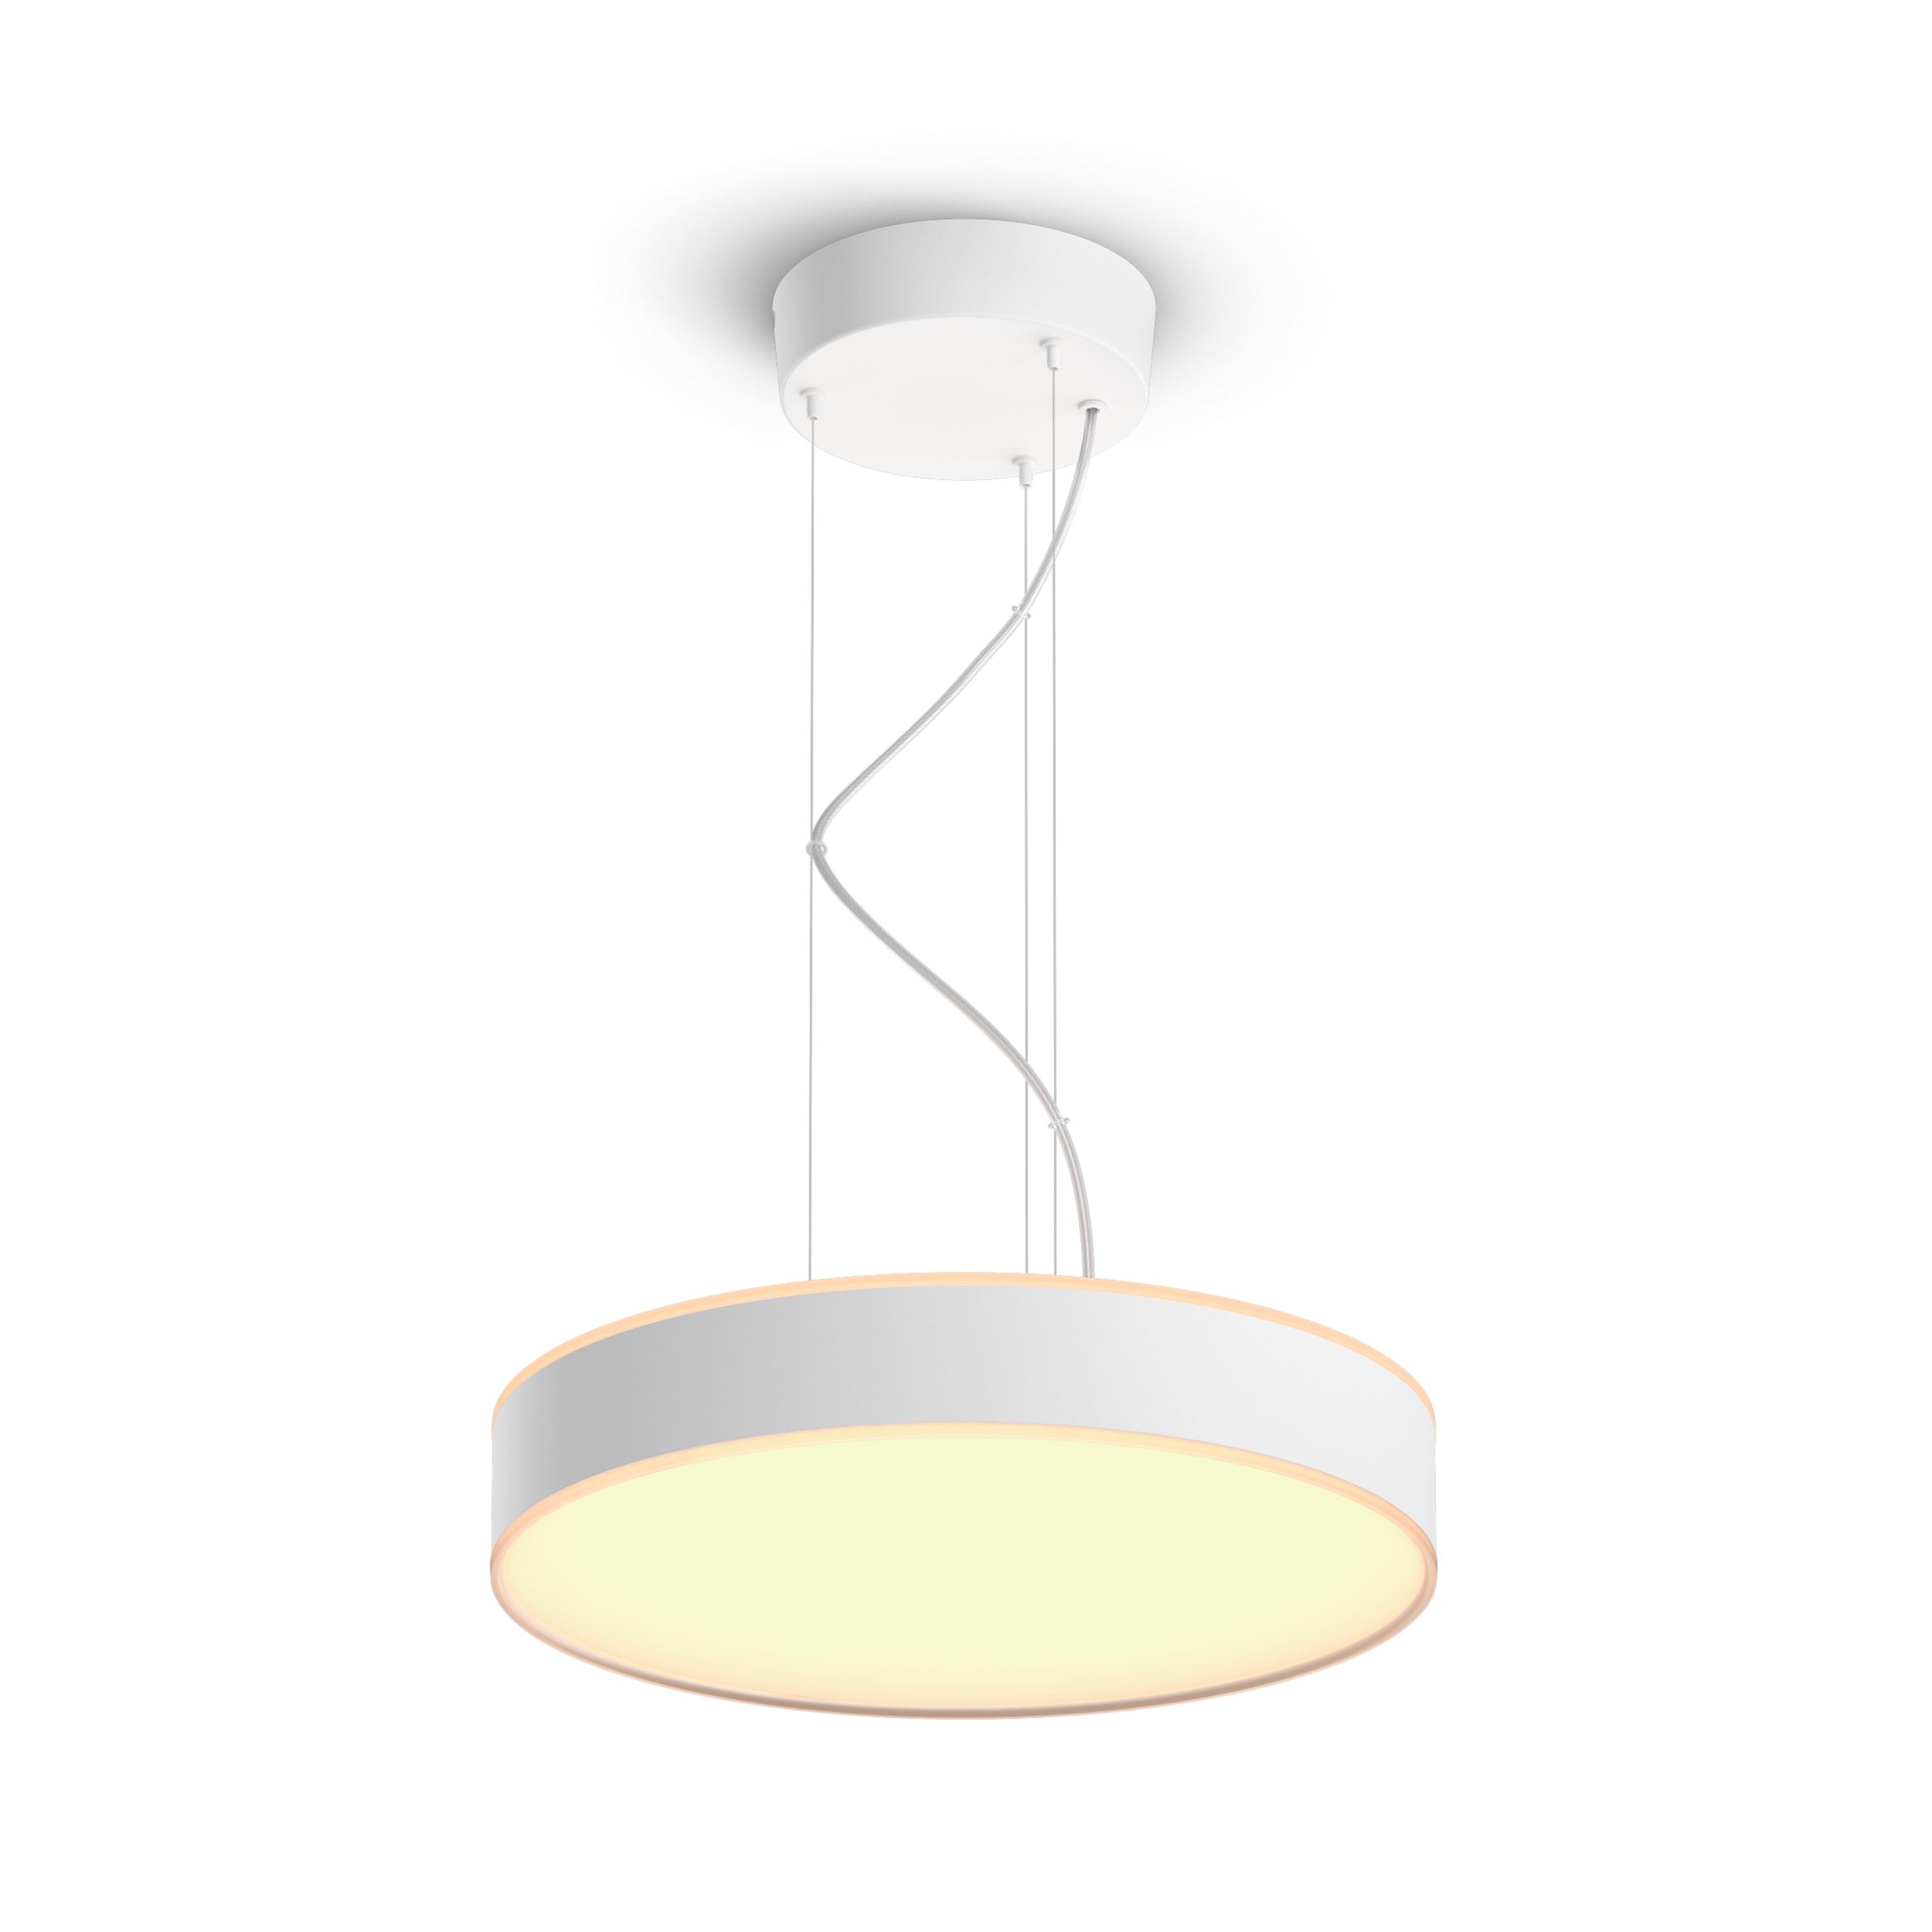 White ambiance Enrave pendant Philips Hue NZ